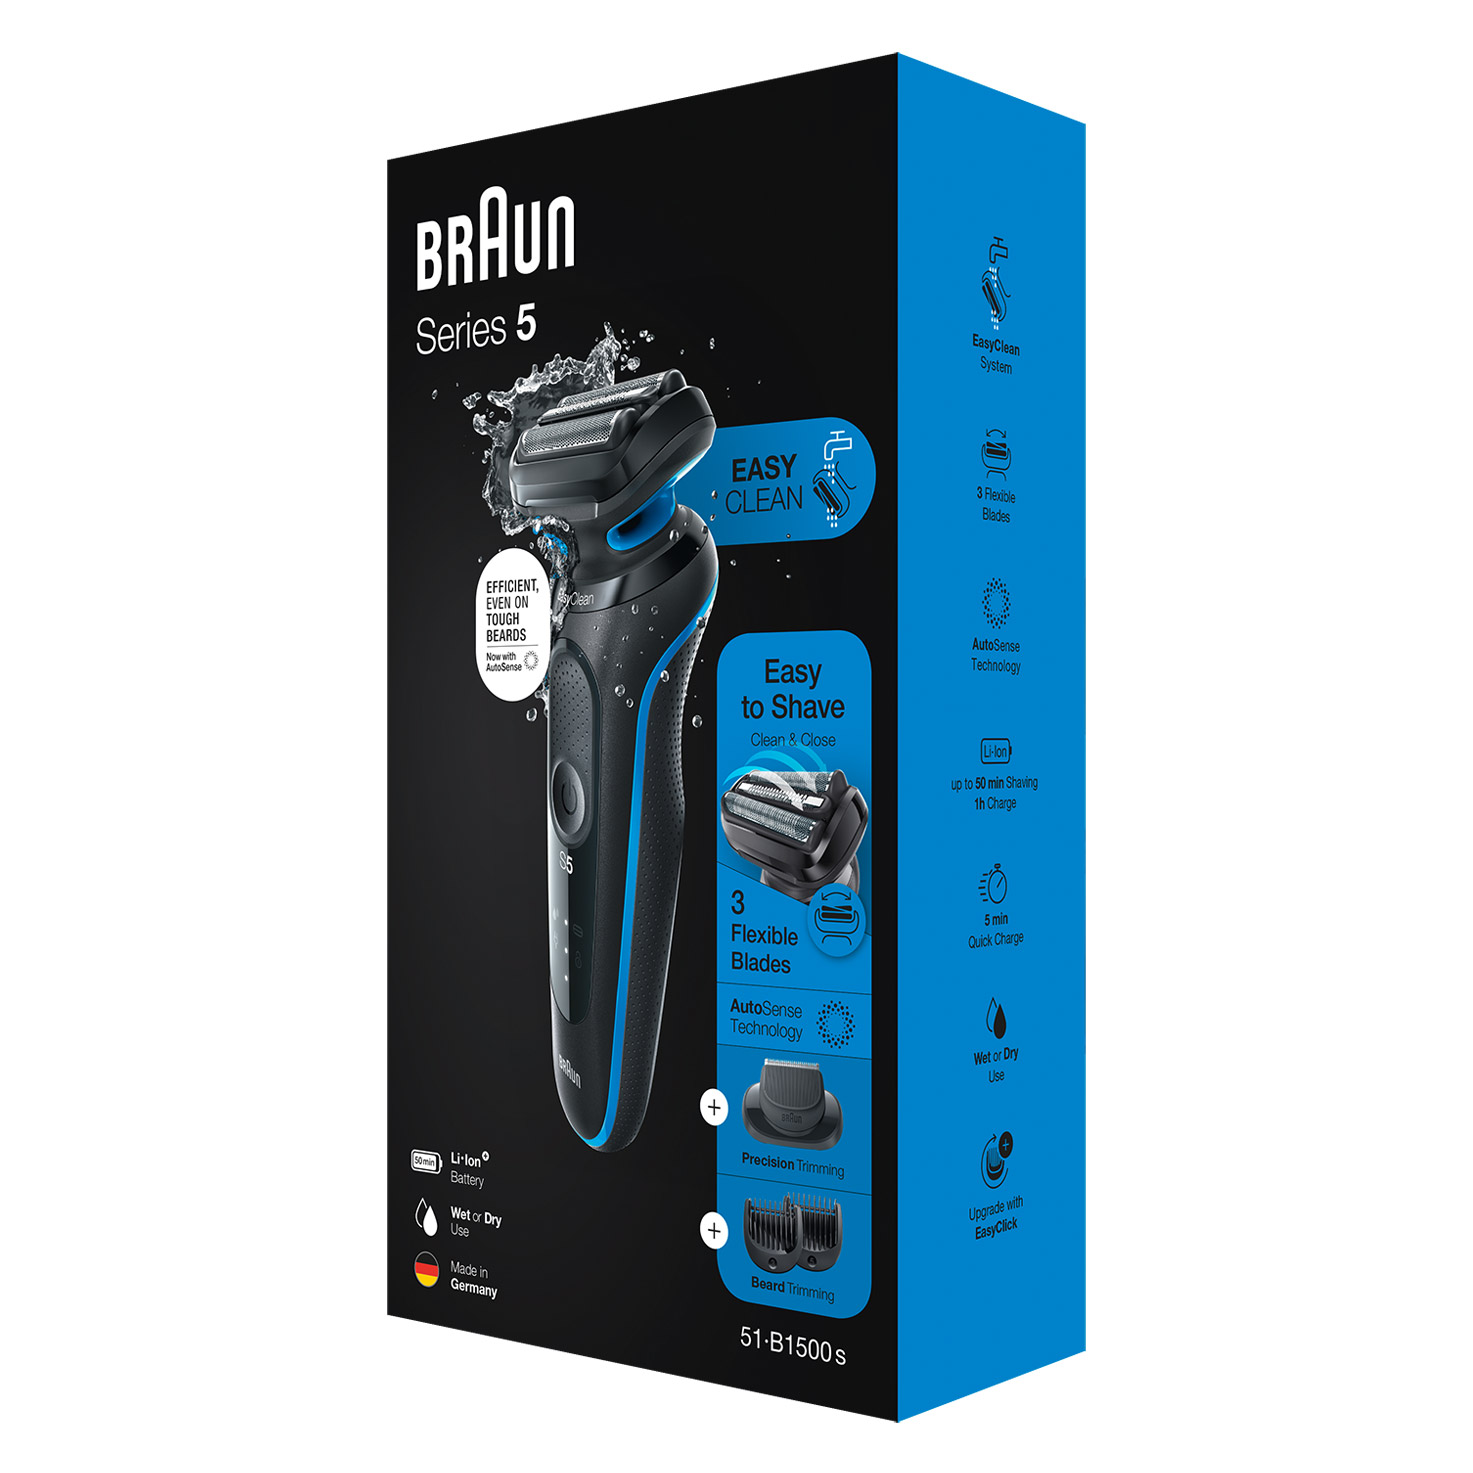 & Wet | for 5 with AutoSense Men, shaver Dry Braun Series